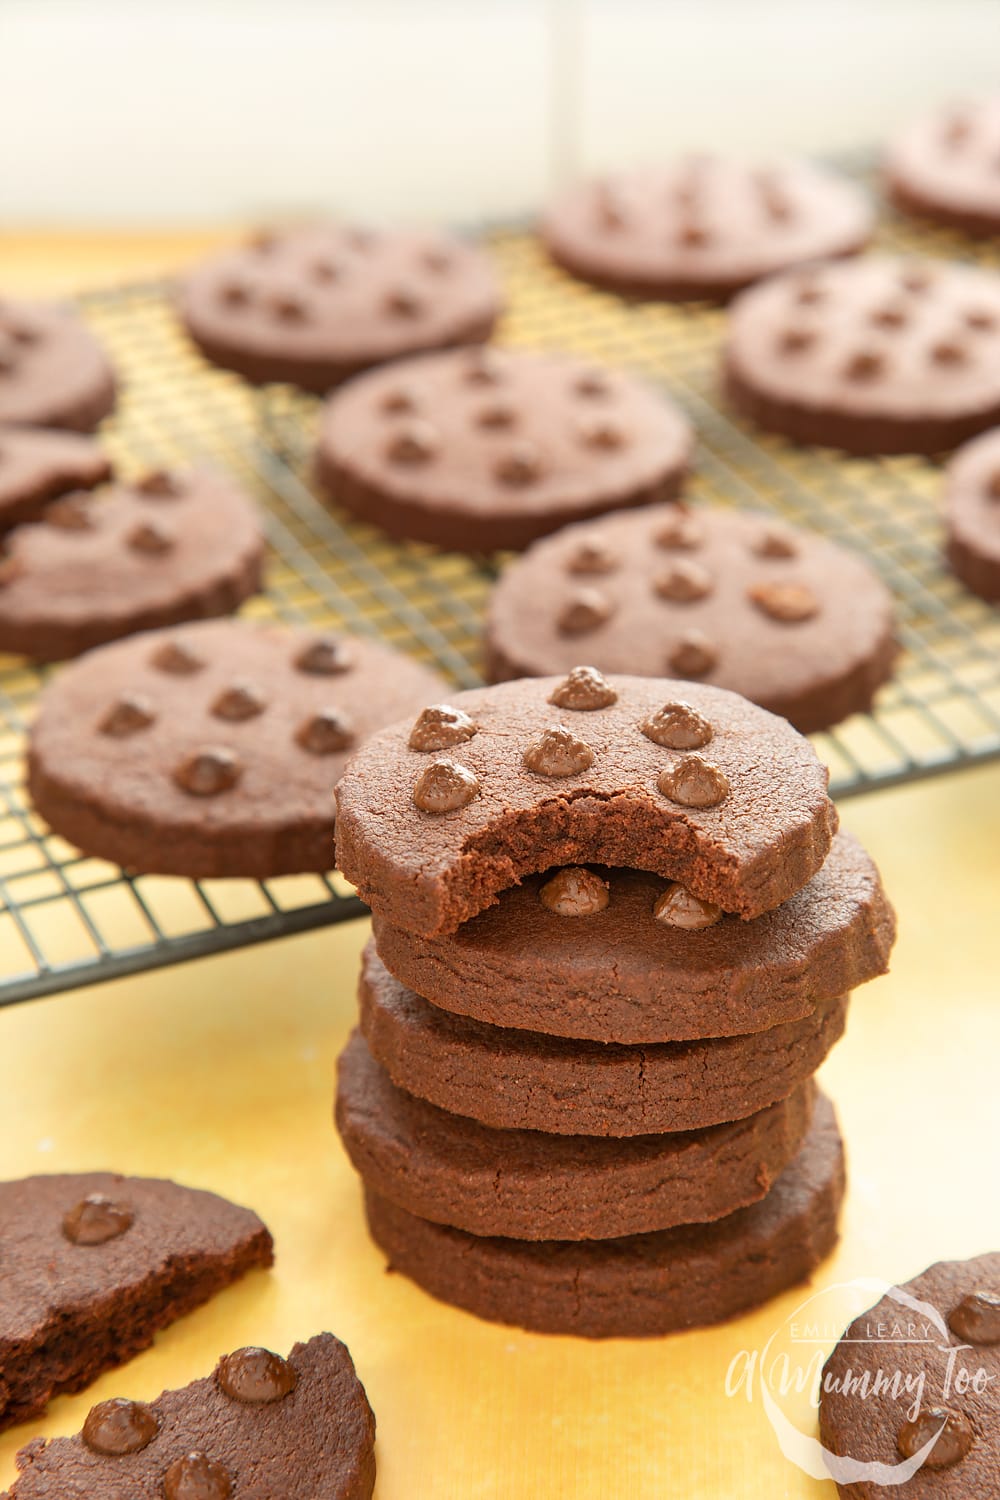 A stack of chocolate shortbread cookies. The top cookie has a bite out of it.